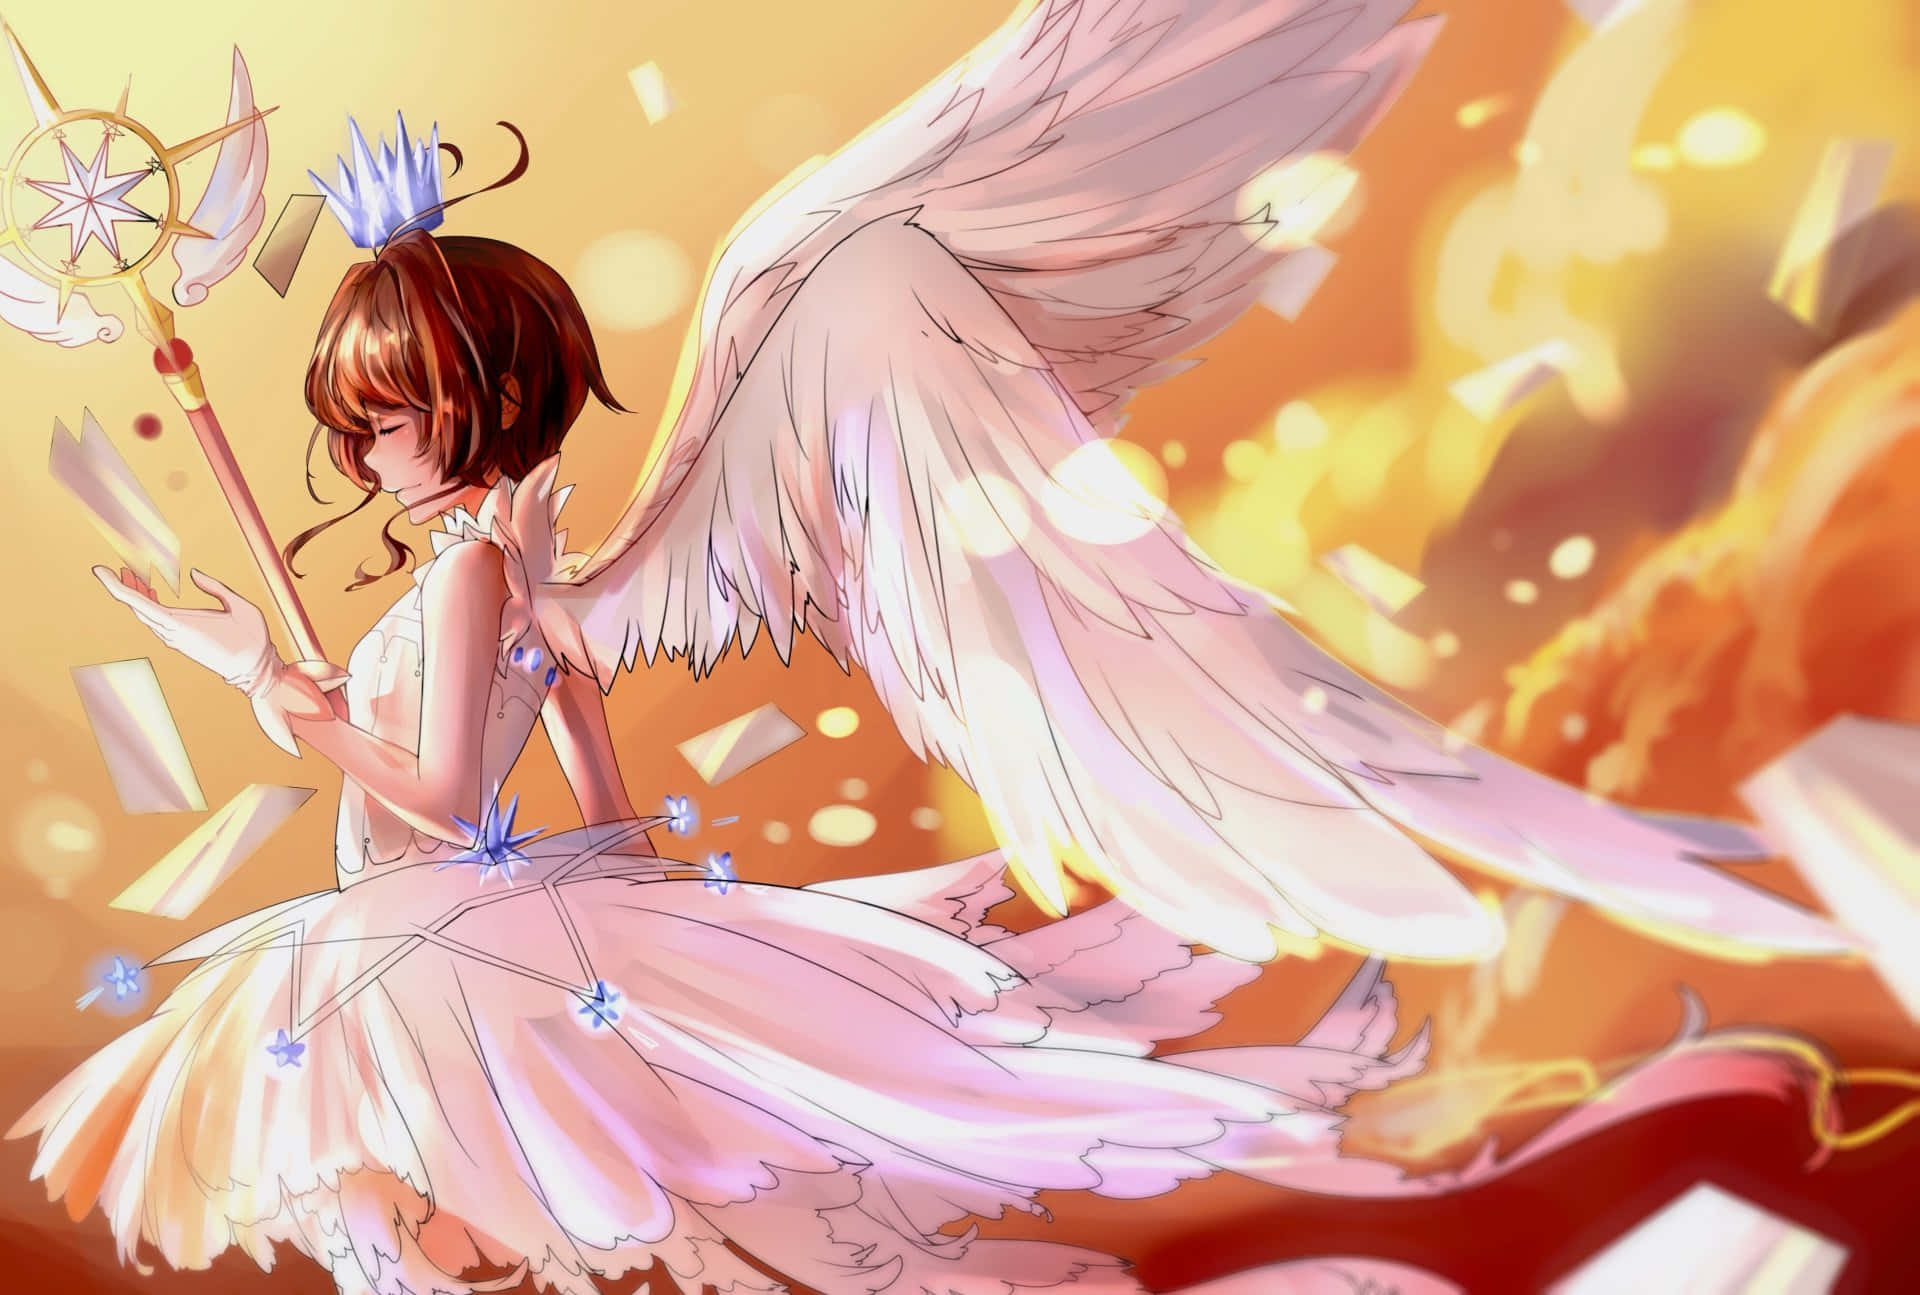 "Sakura in Flight with the Magical Elements"